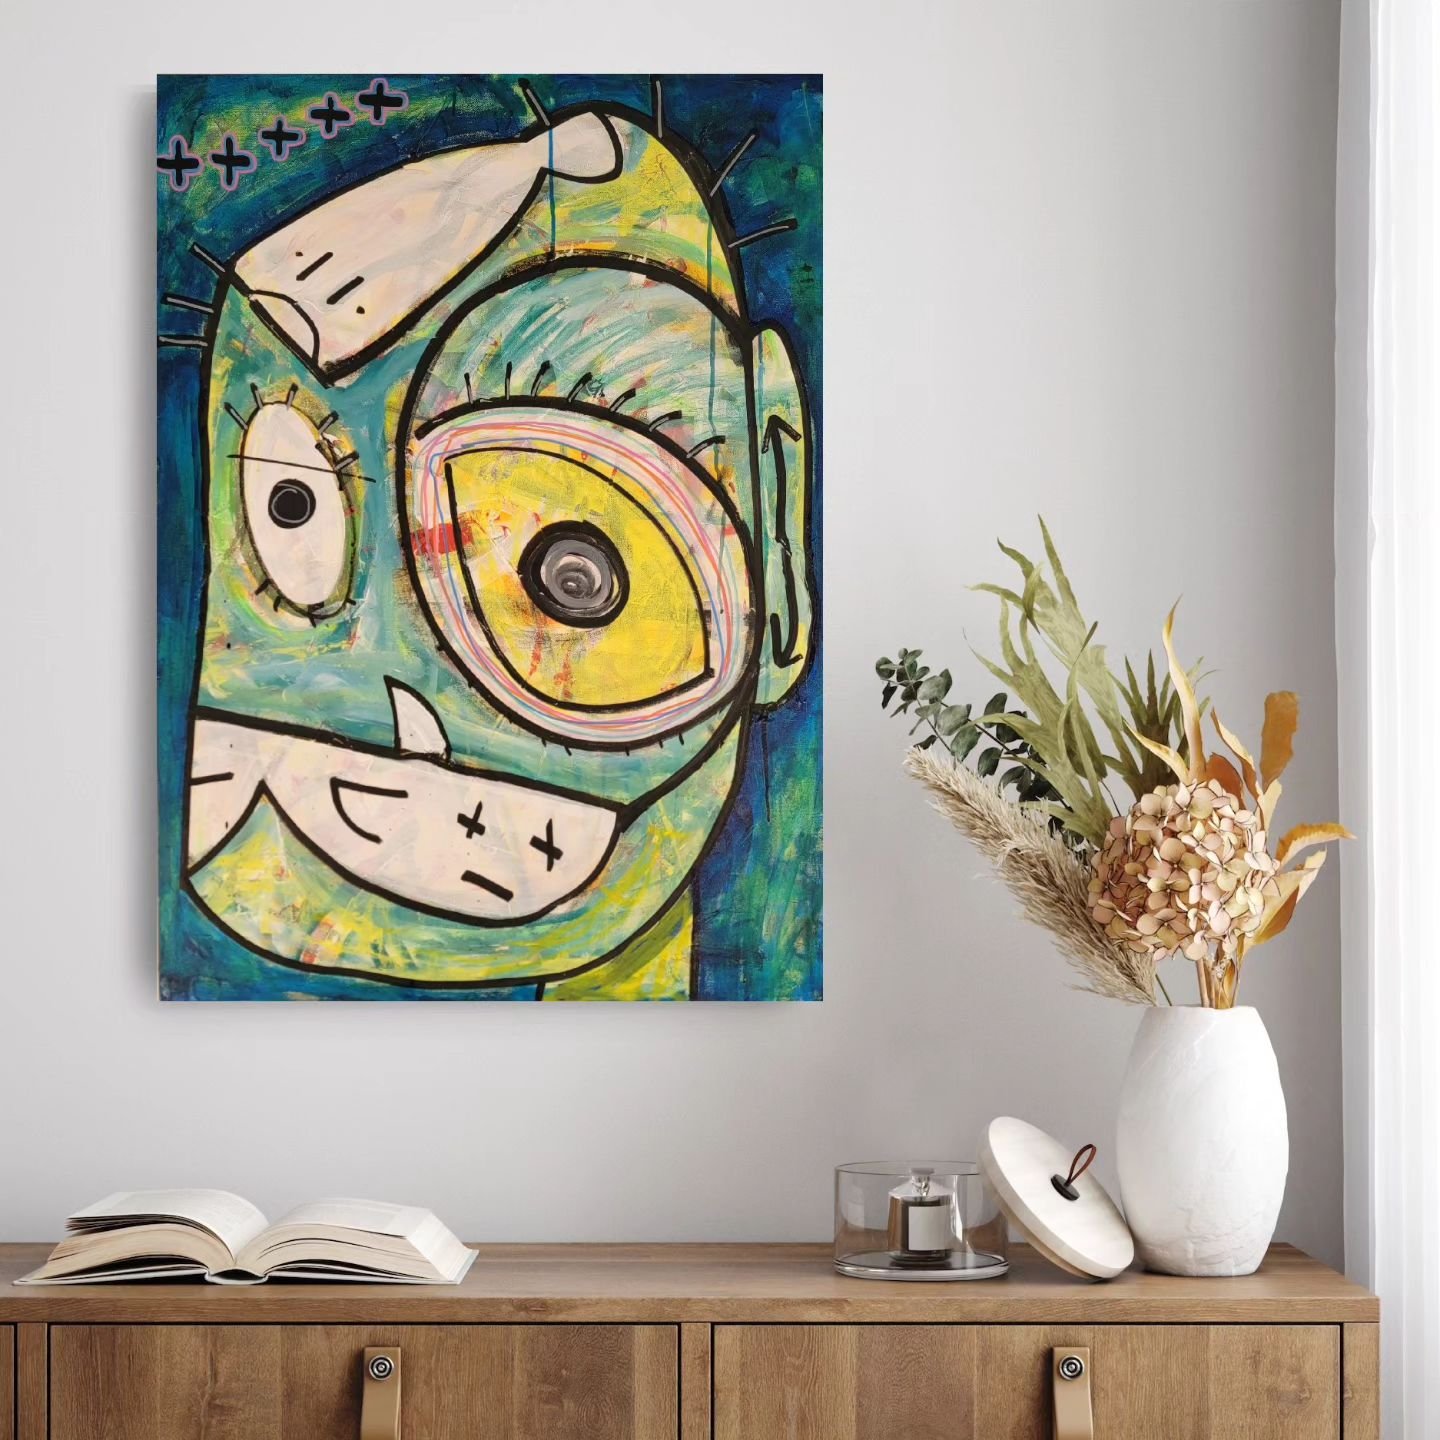 I love it! Not what you expect to see when you walk into a room.  That's what makes EYES so much fun to display.  I've sat and listened to a book while staring at him and letting my mind go

#art #artistsoninstagram #streetart #acryliconcanvas #jason